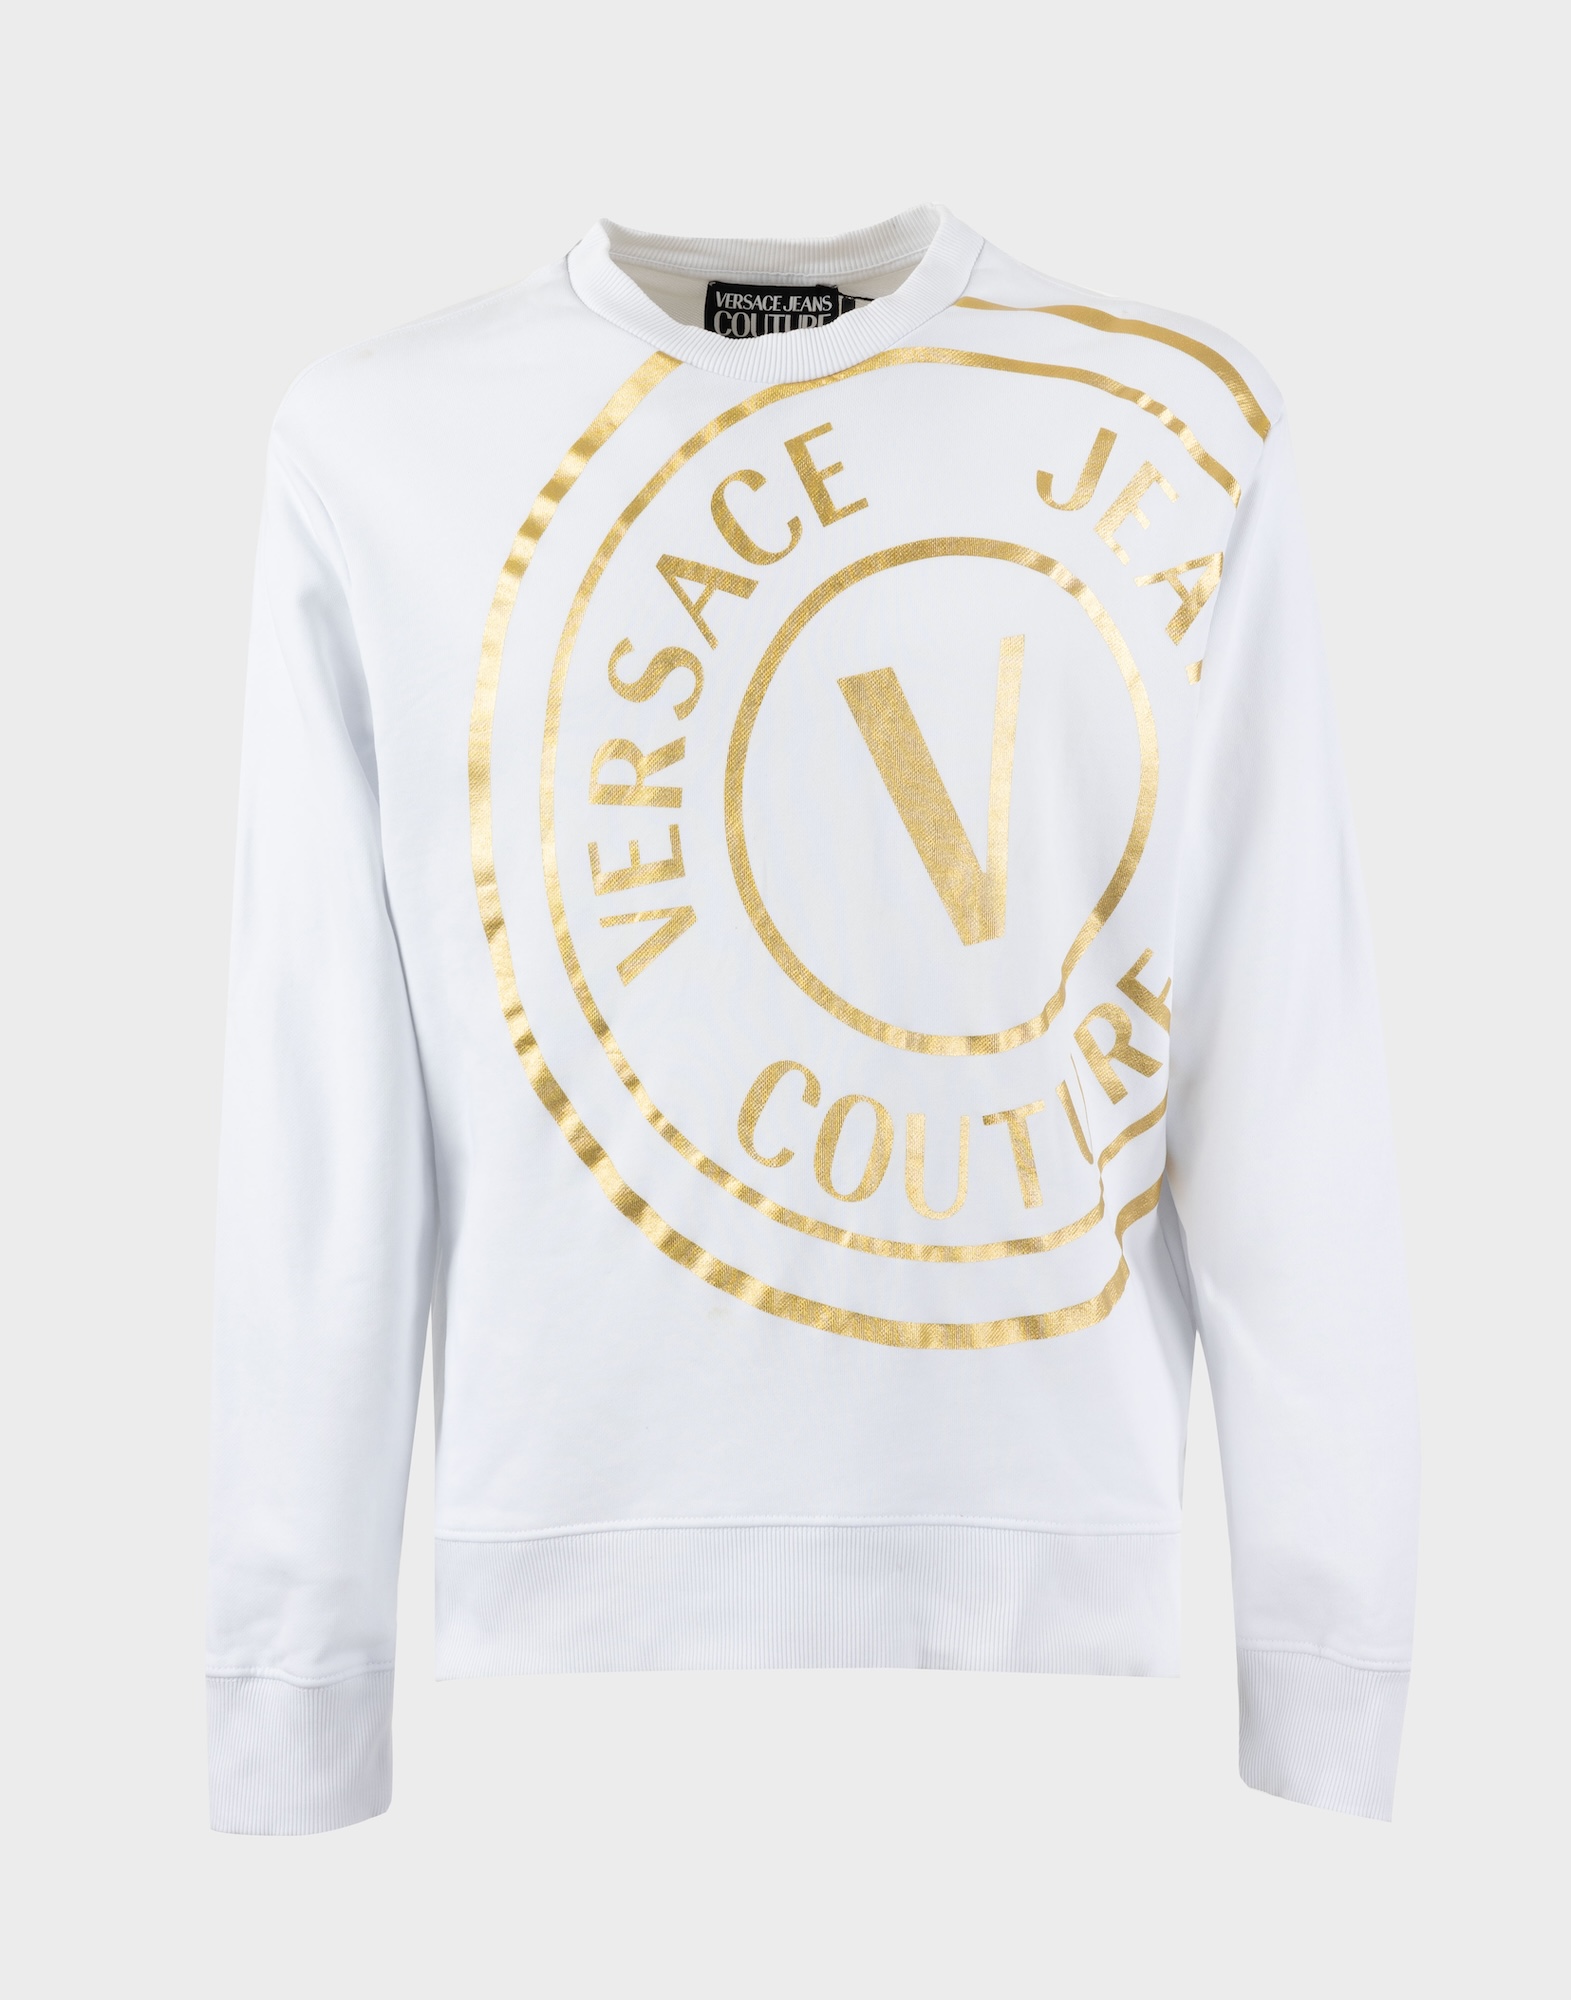 white men's cotton sweatshirt with gold big logo on the front